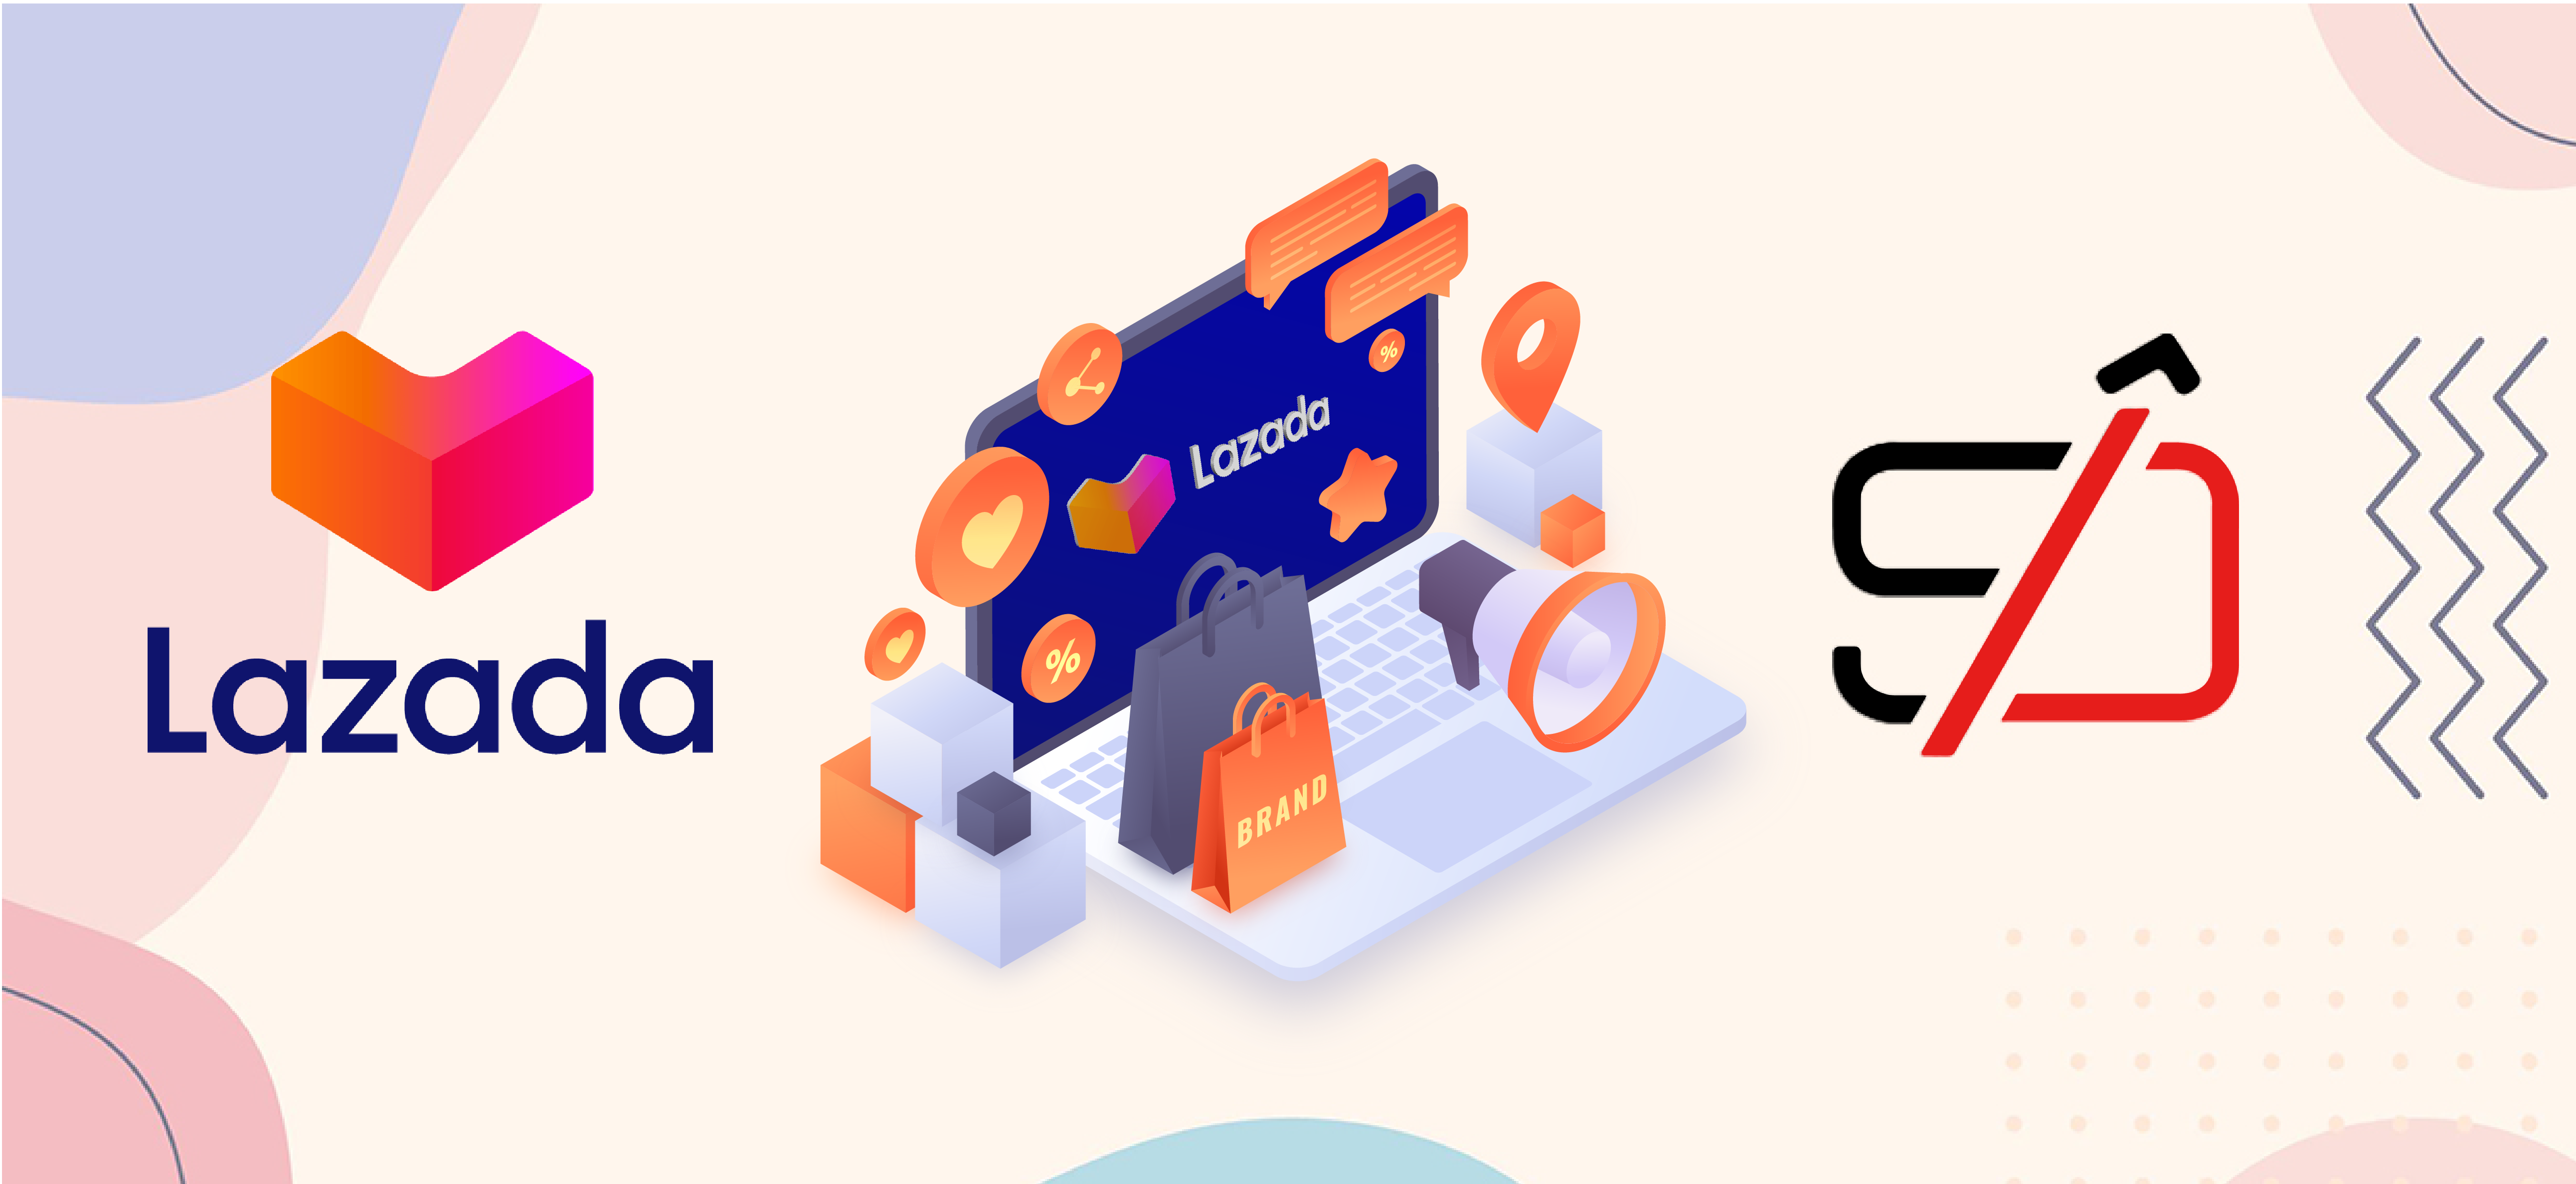 Start Selling on Lazada Today with These 3 Easy Tips